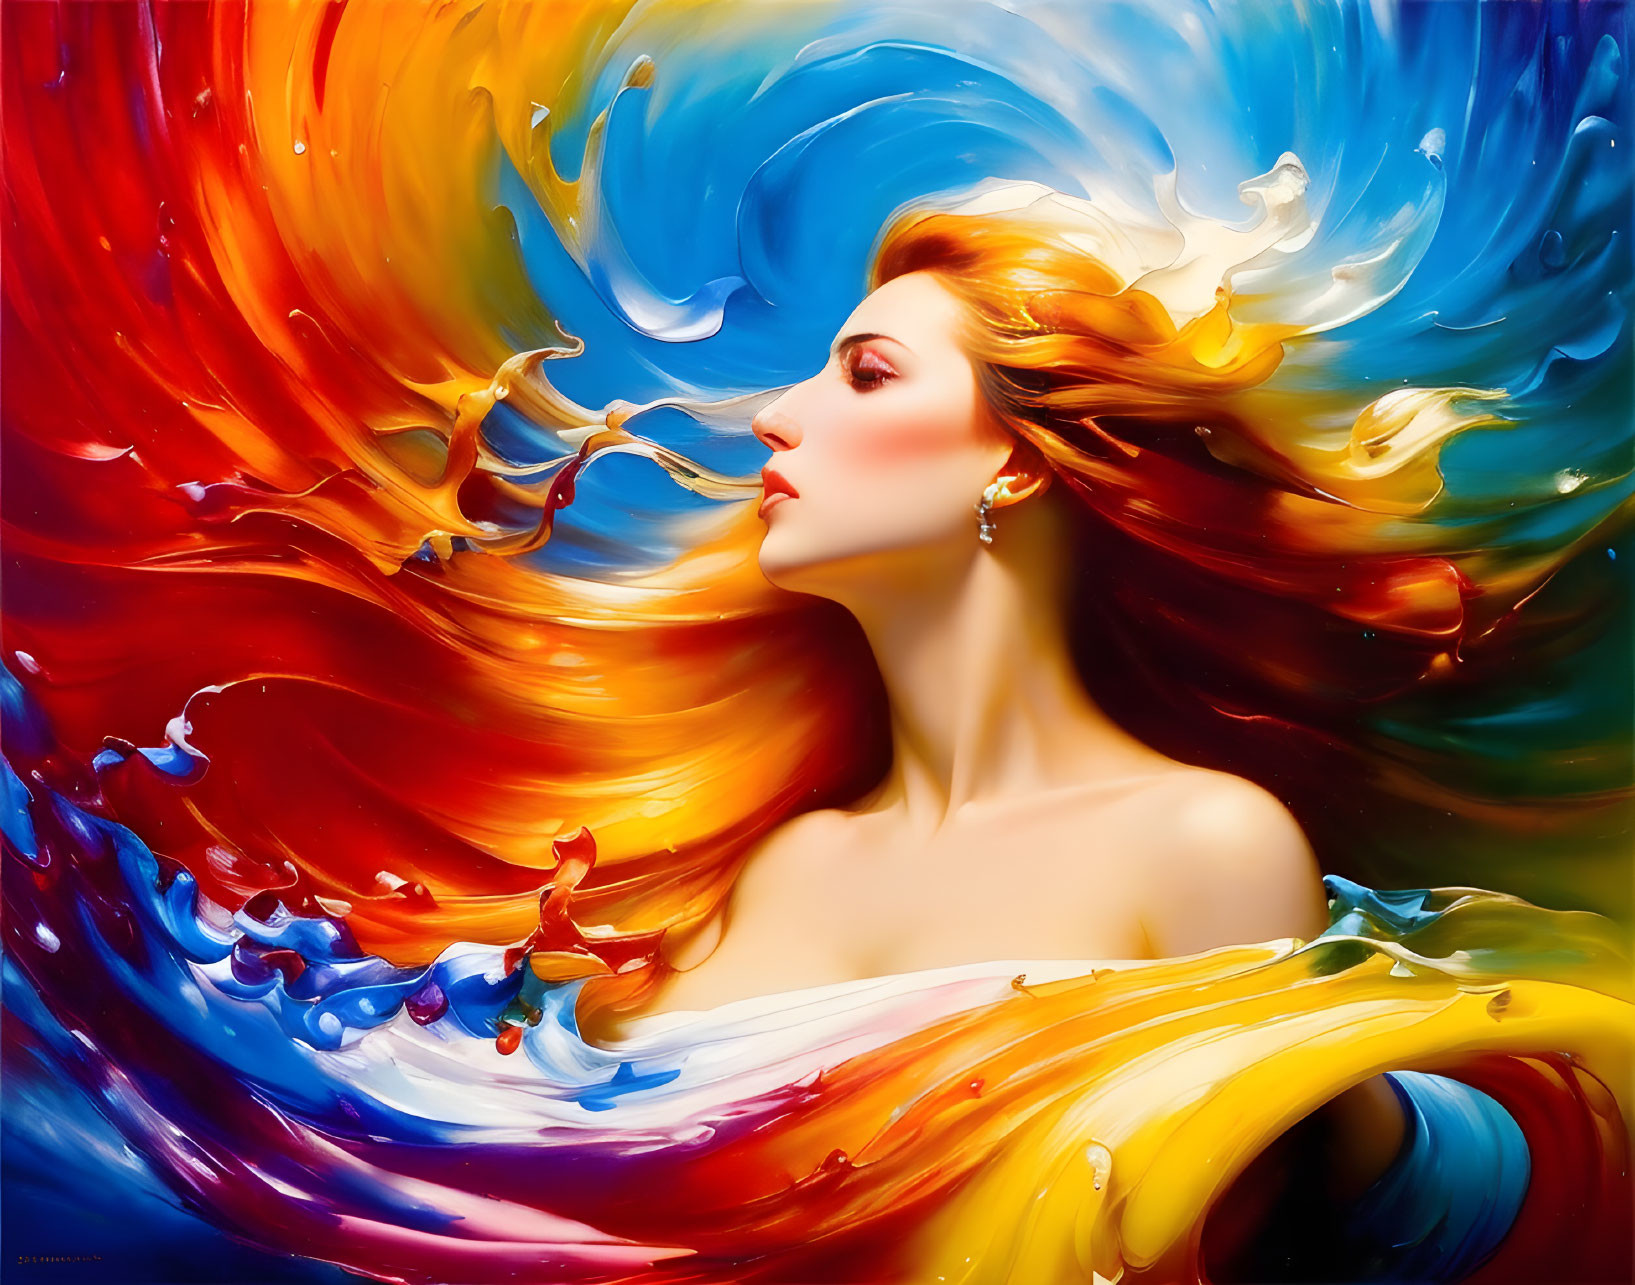 Colorful digital artwork: Woman with flowing hair in vivid reds, blues, and yellows